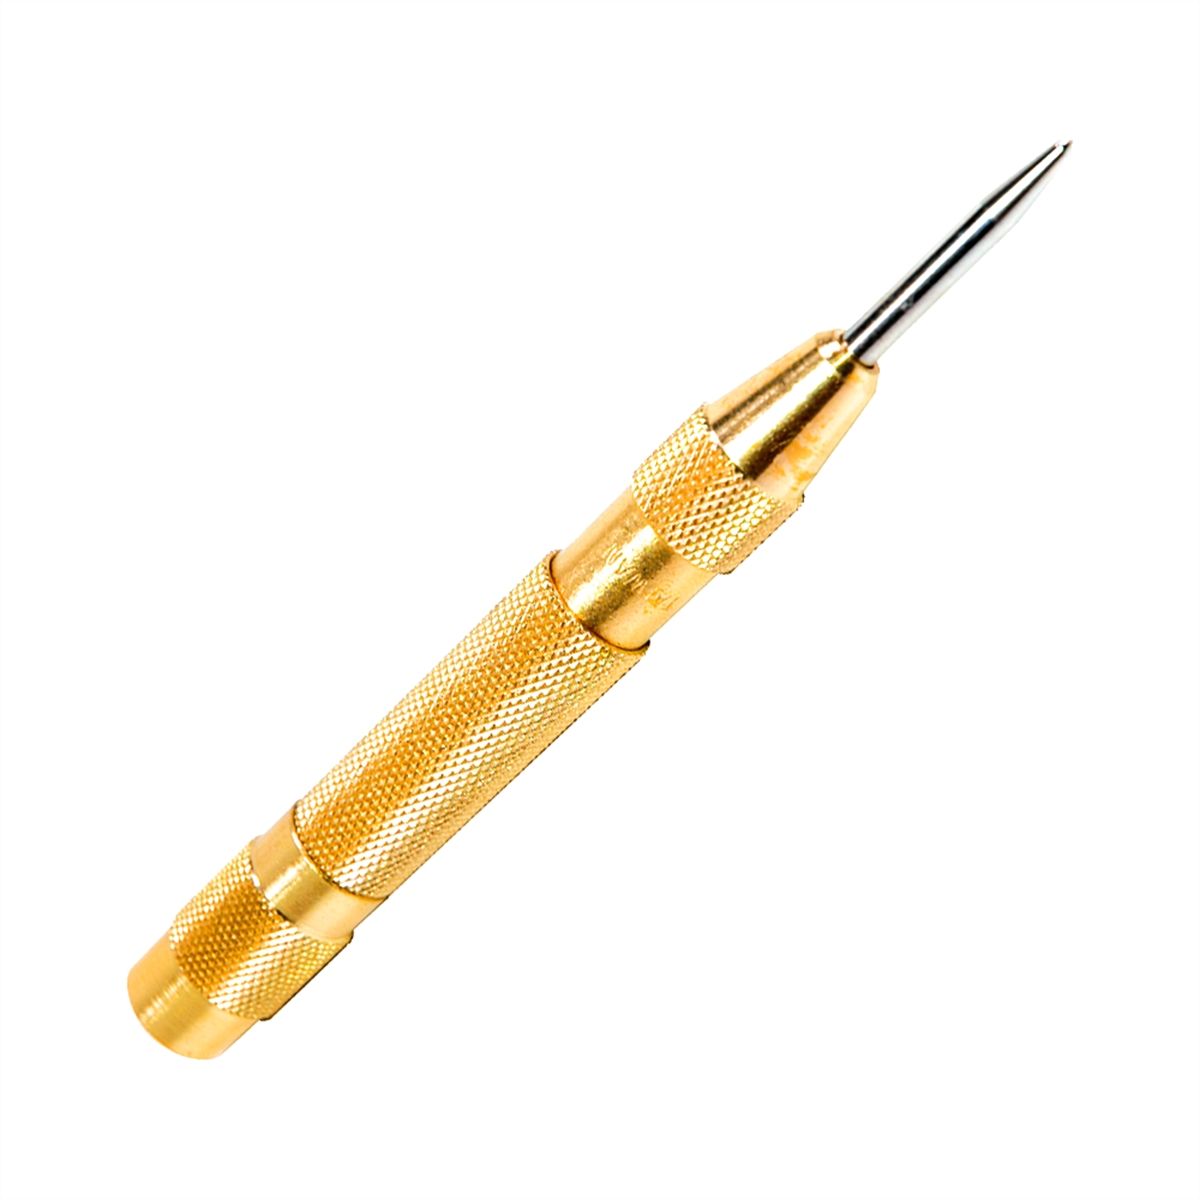 TT600-3AP, Automatic Center Punch, Metal Shaping Hand Tools